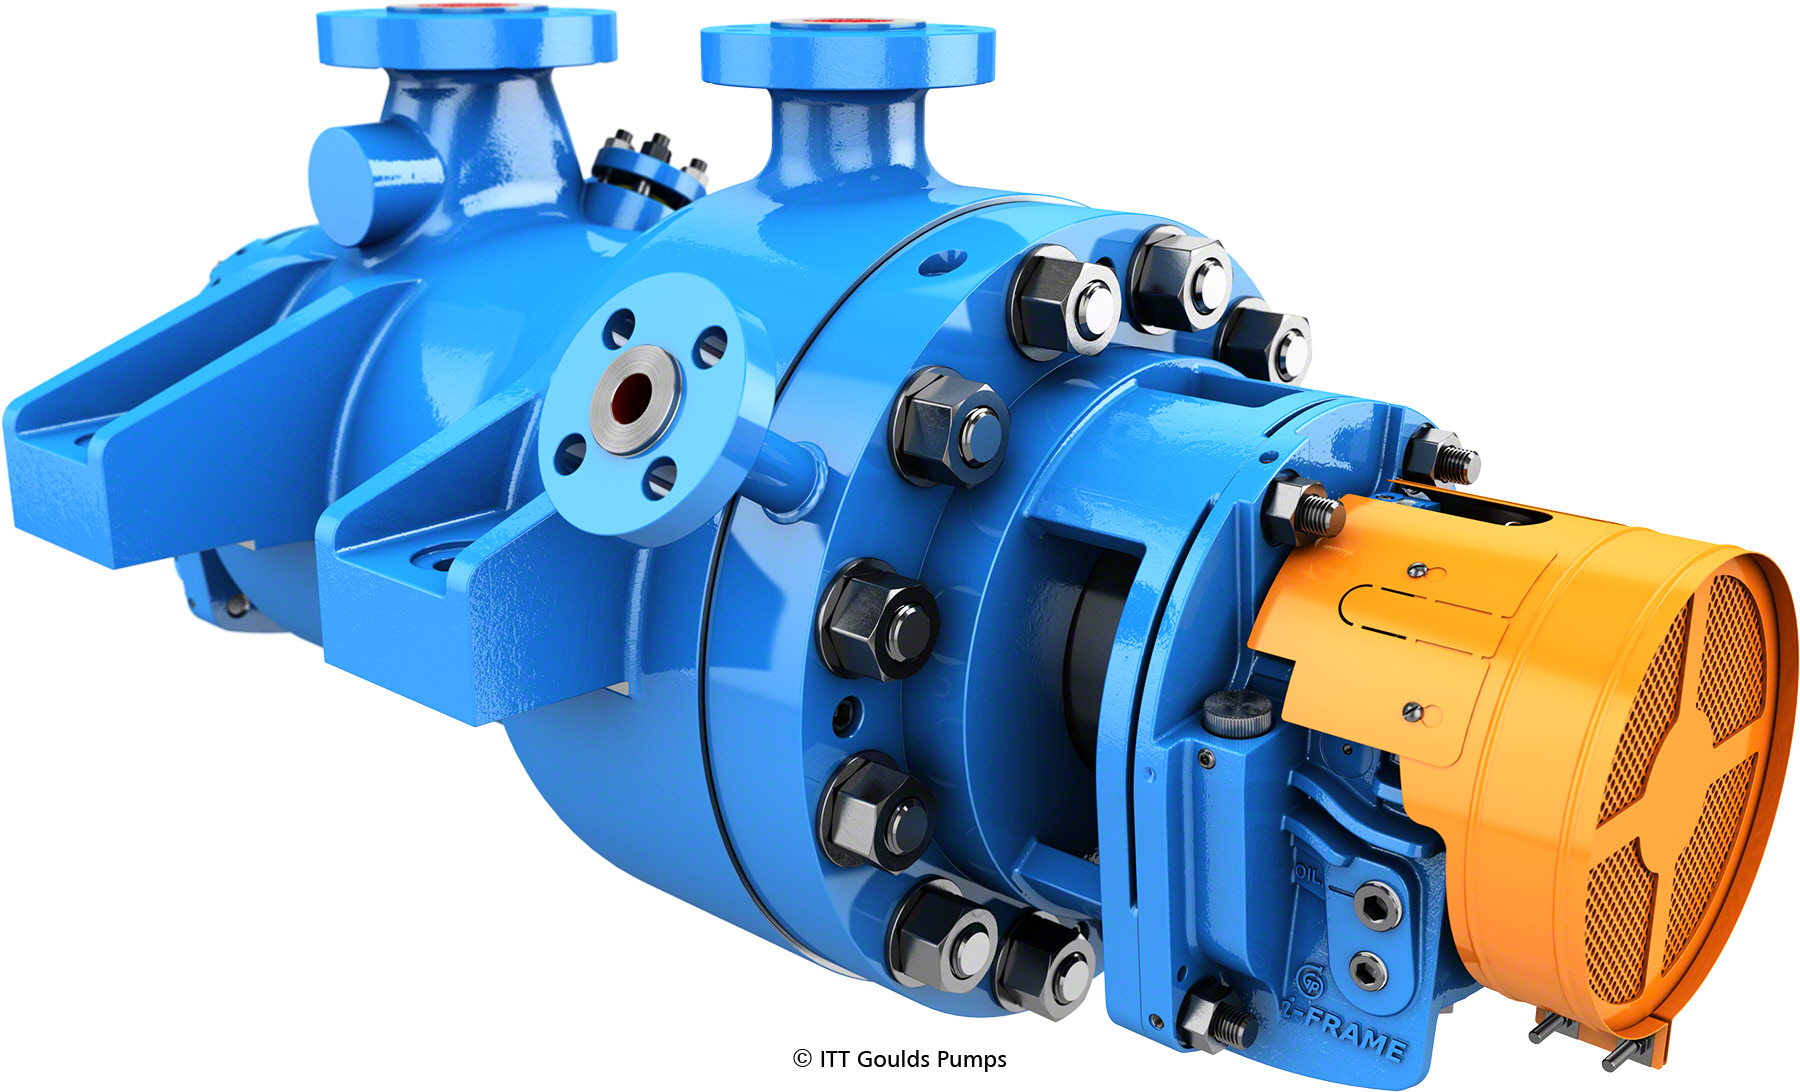 The Goulds Pumps' 7200SB is a high-temperature, high-pressure pump designed for harsh environments.